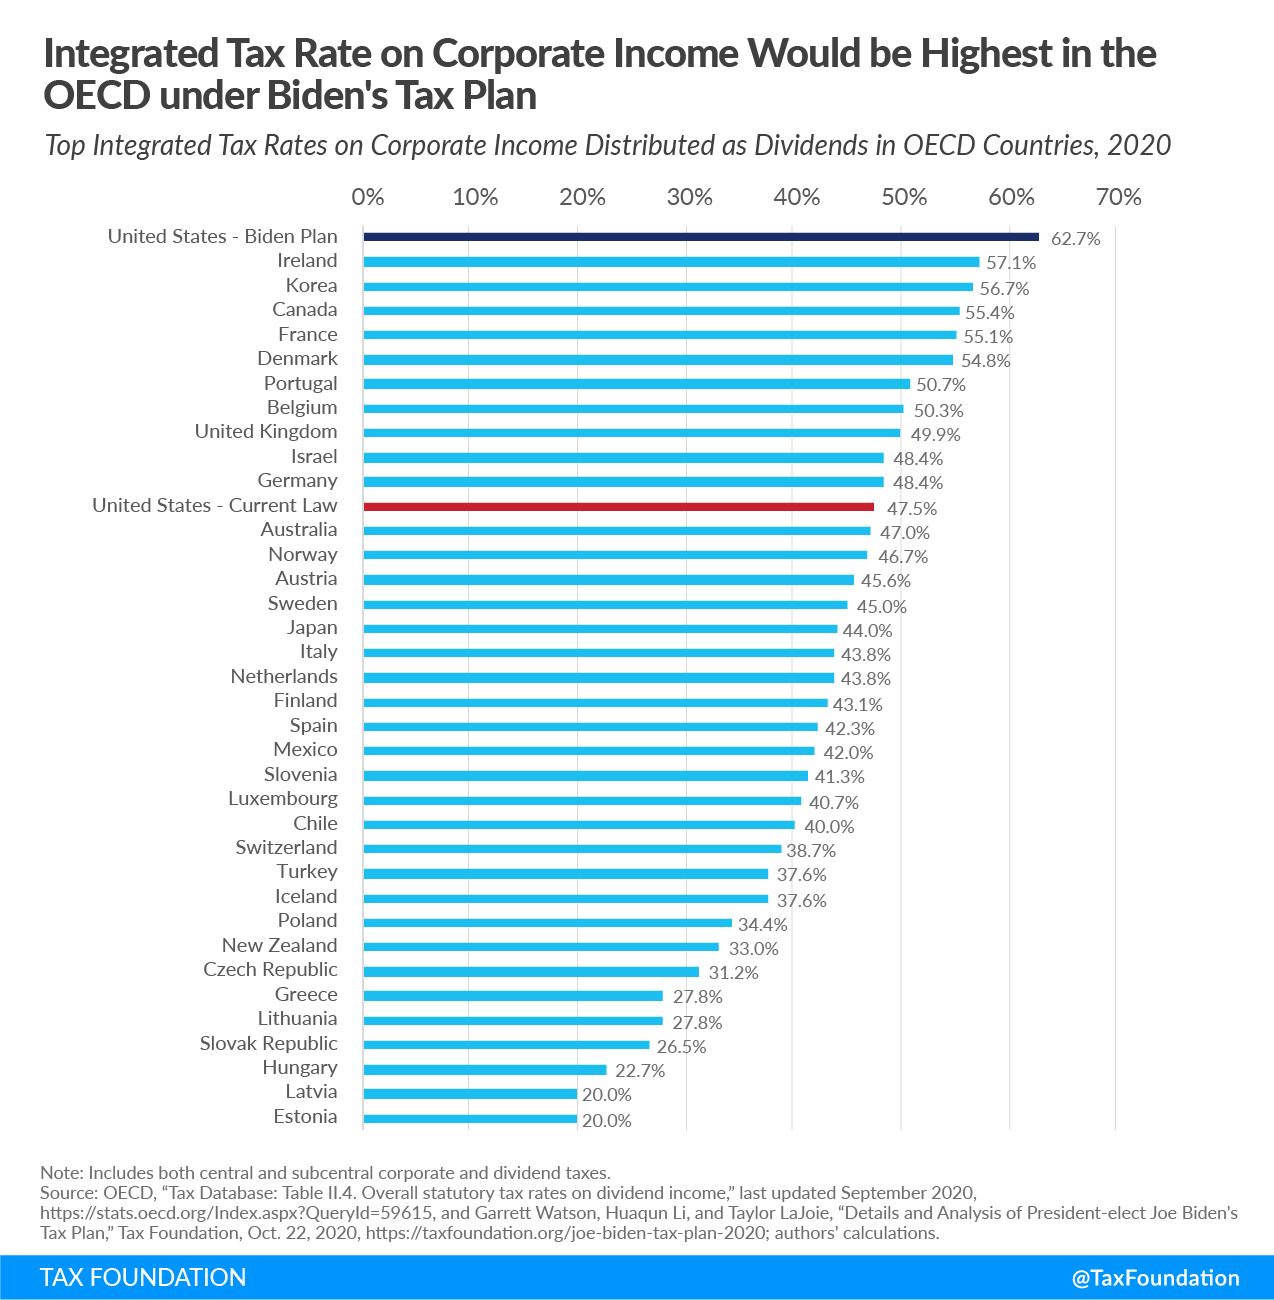 Integrated tax rate on corporate income would be the higest in the OECD under Biden's tax plan Double Taxation of Corporate Income in the United States and the